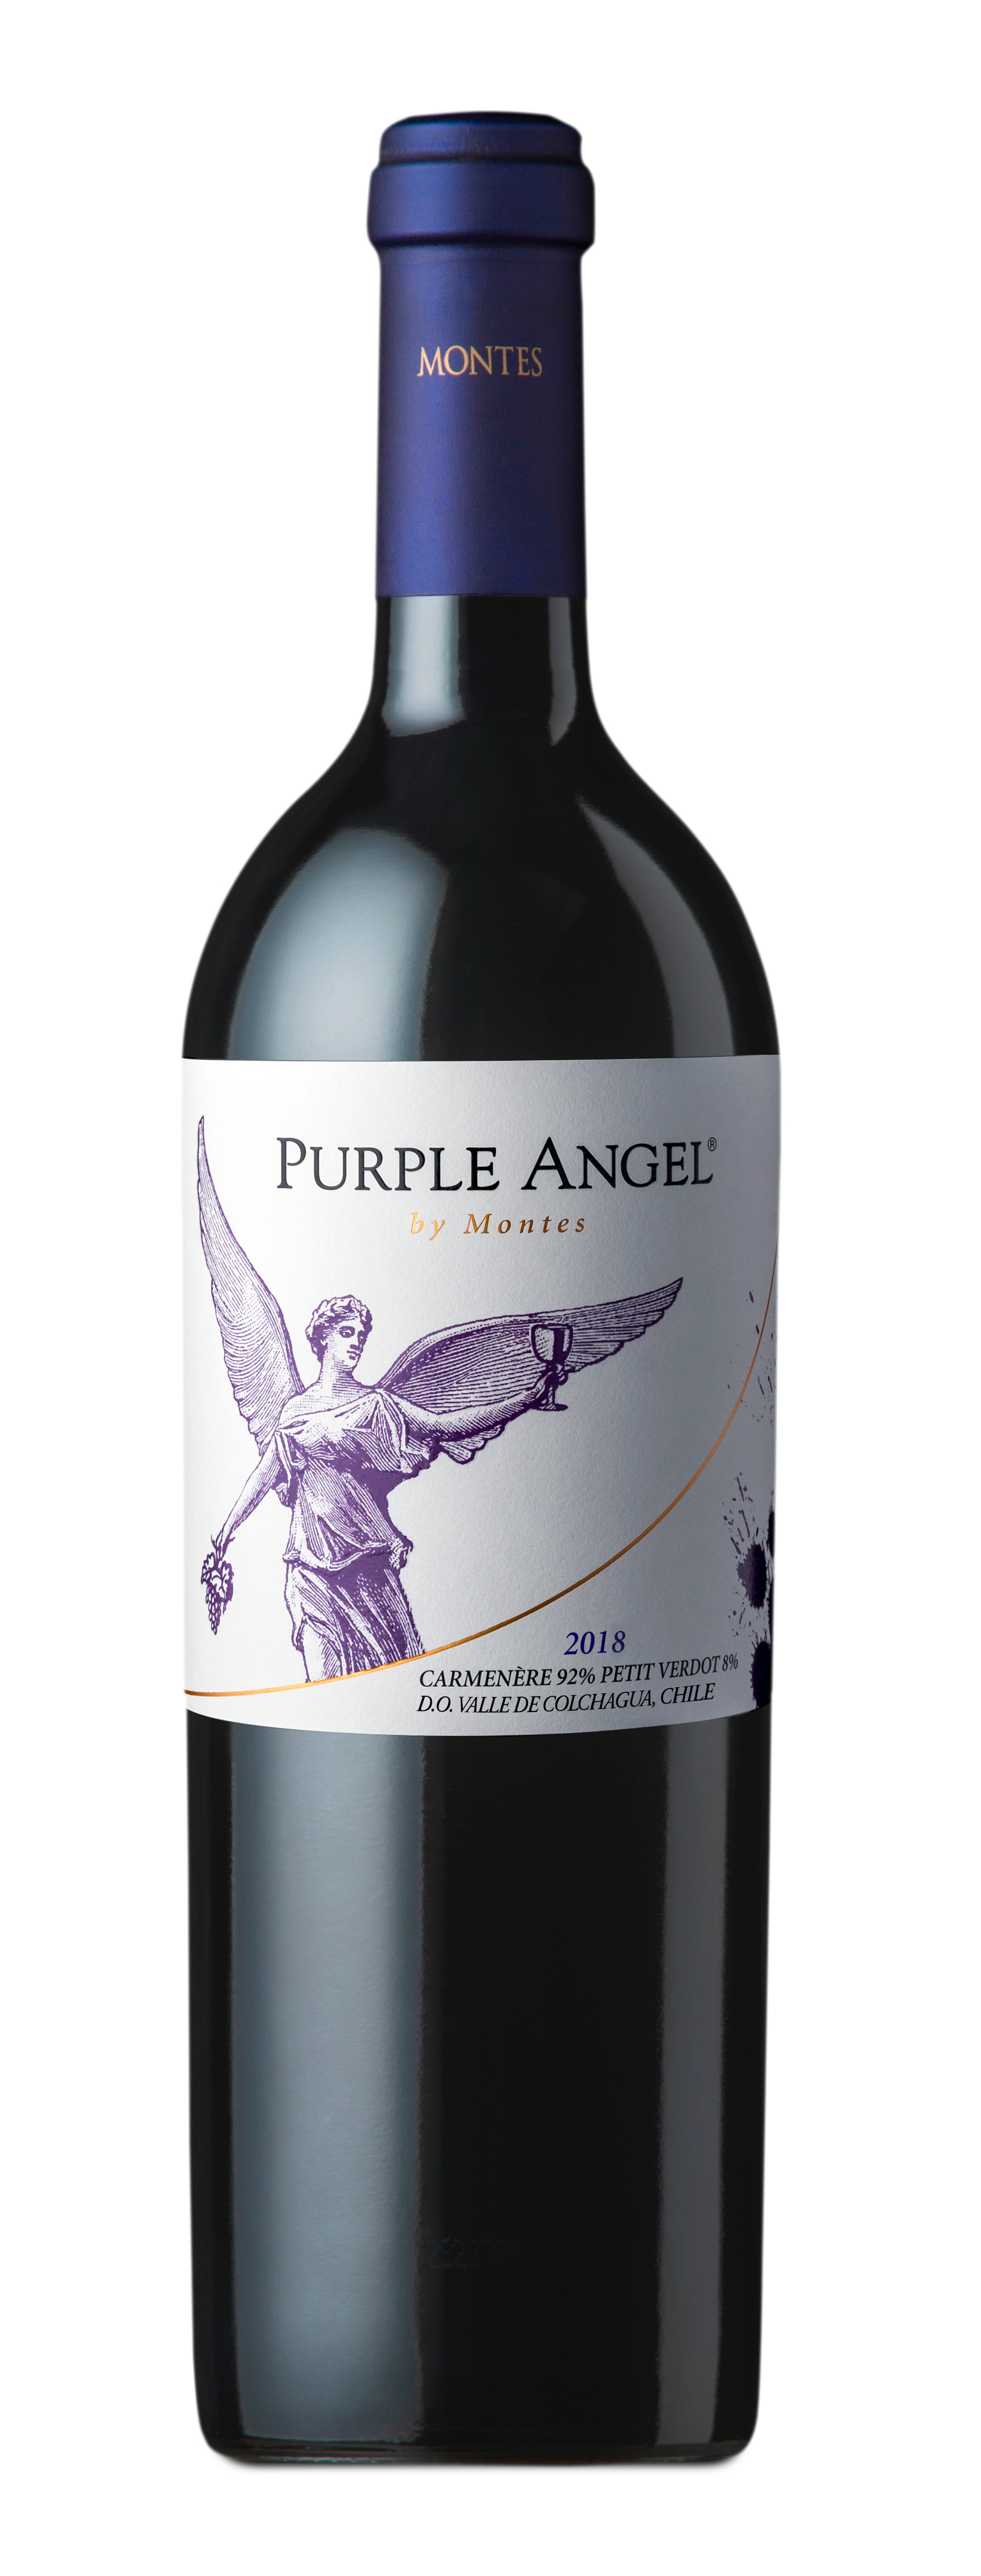 D.O. Colchagua Valley Purple Angel by Montes 2018